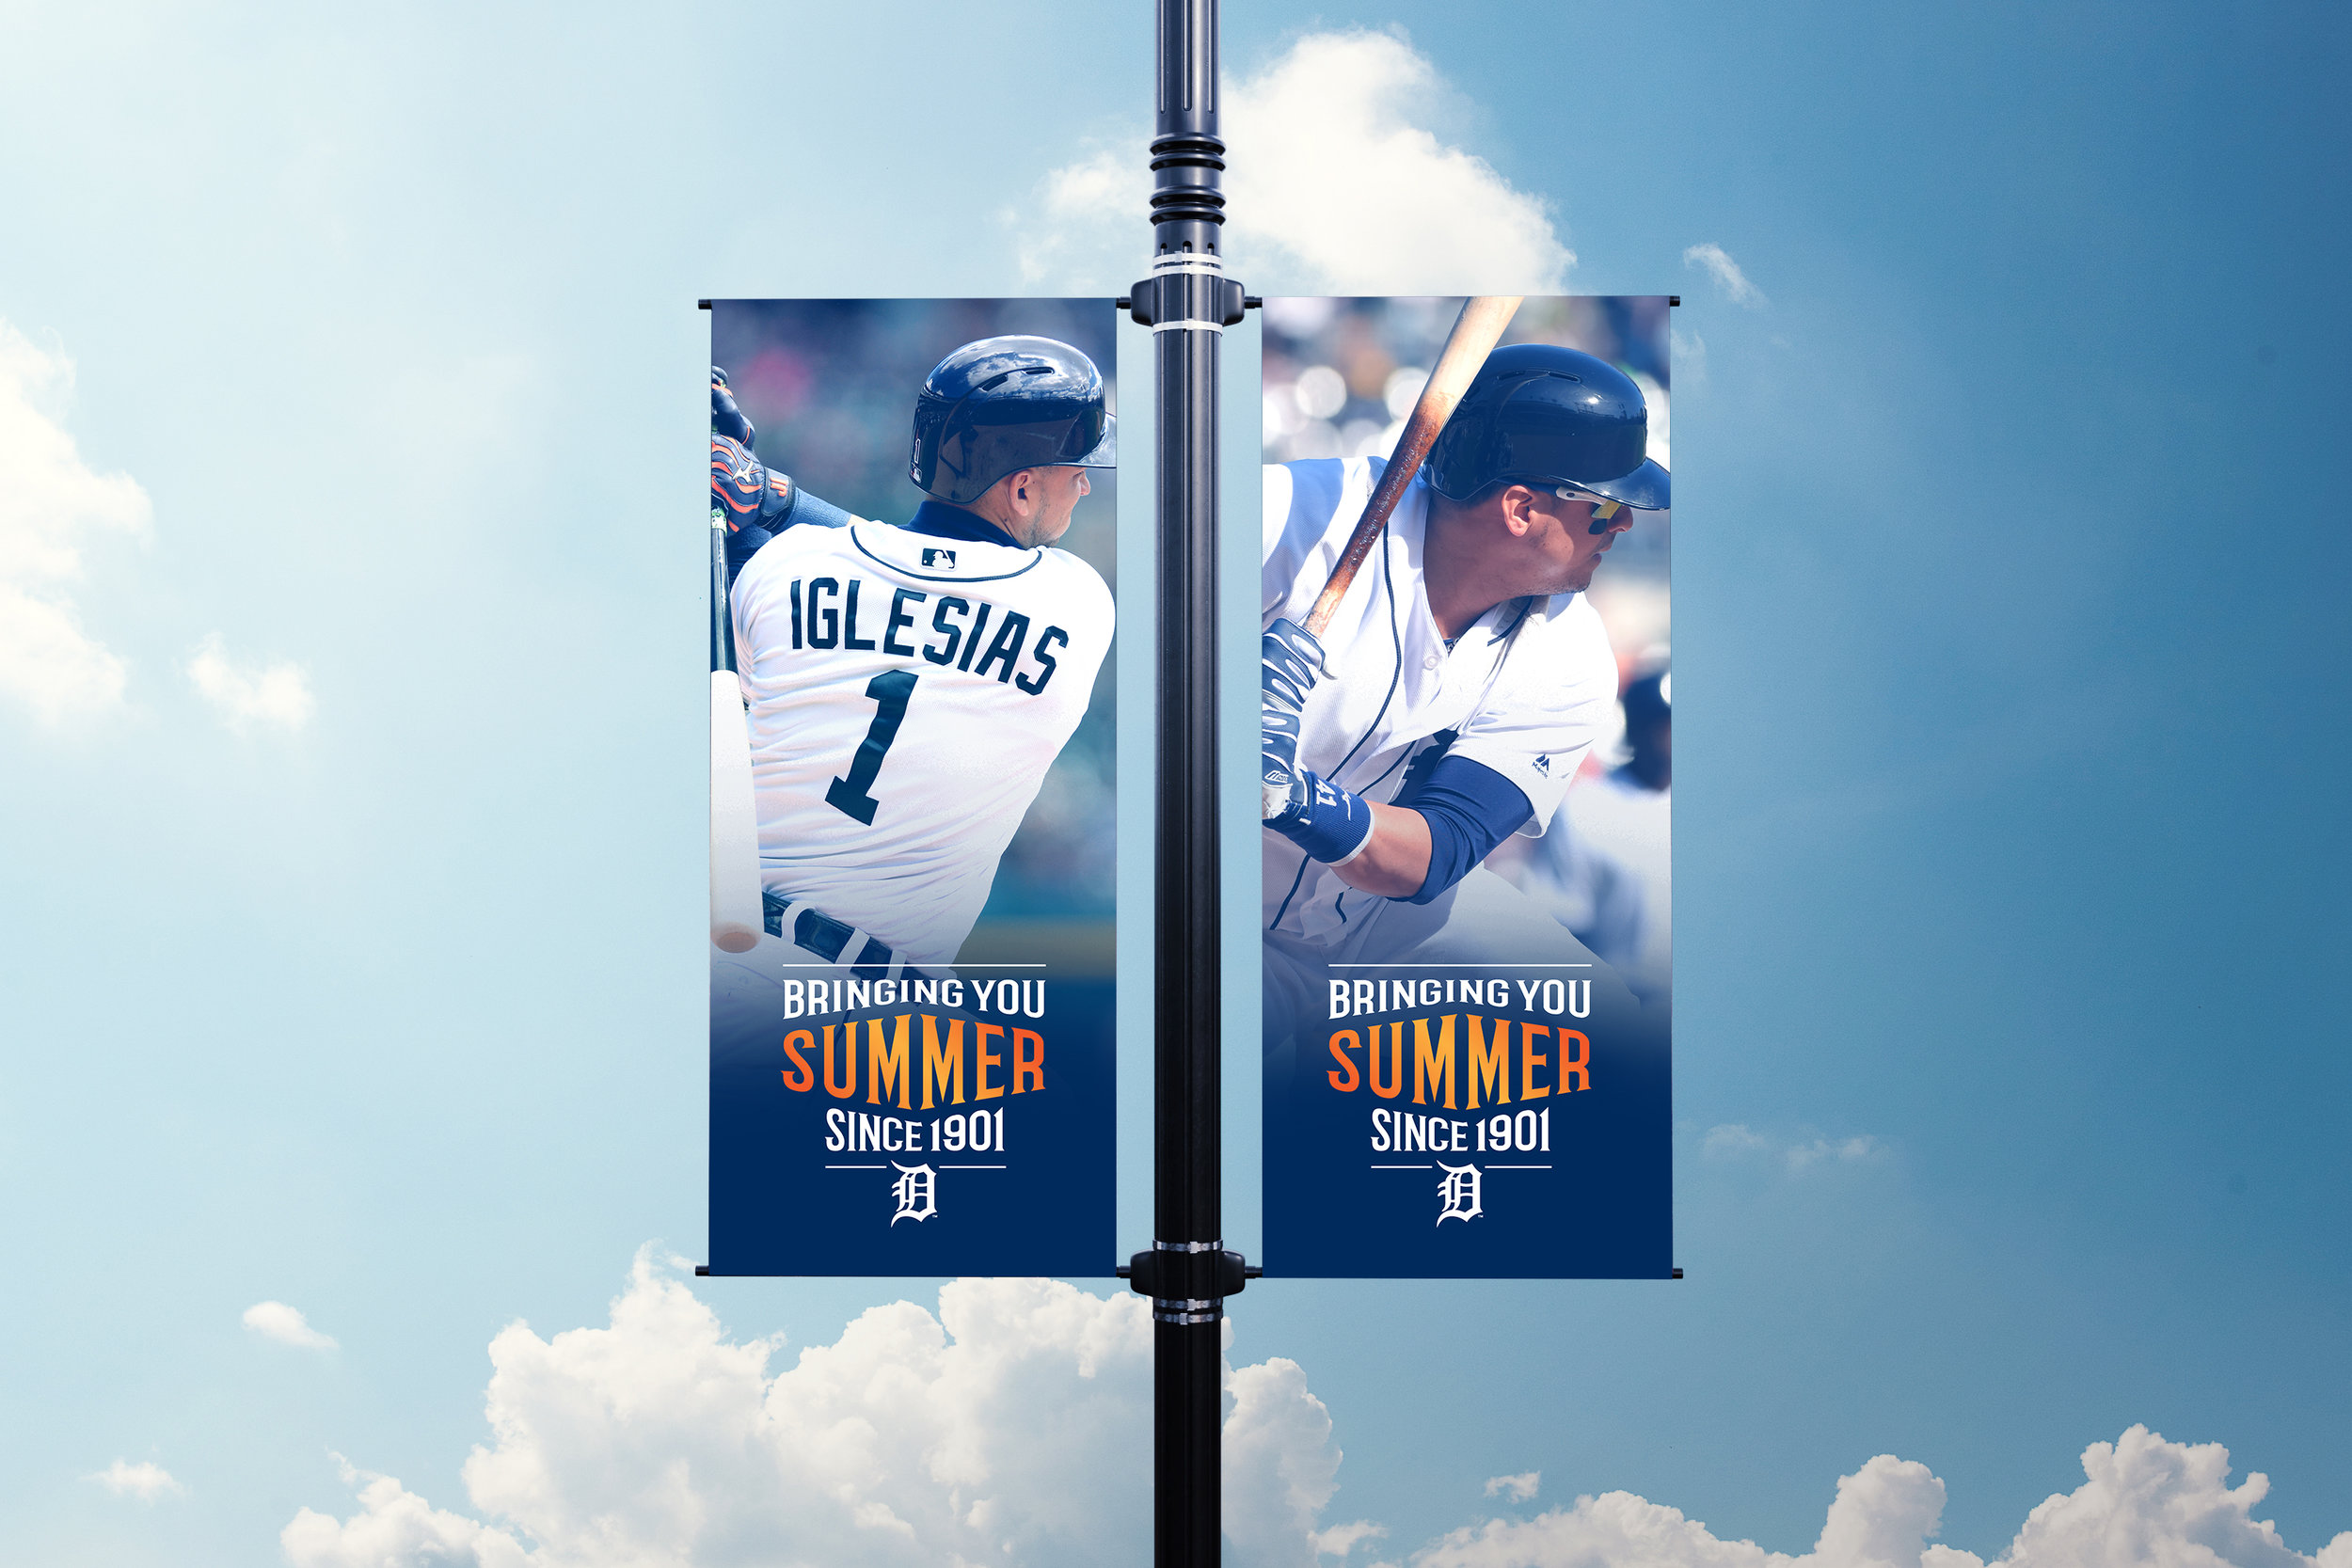  Bringing You Summer Since 1901 Campaign Pole Banners 